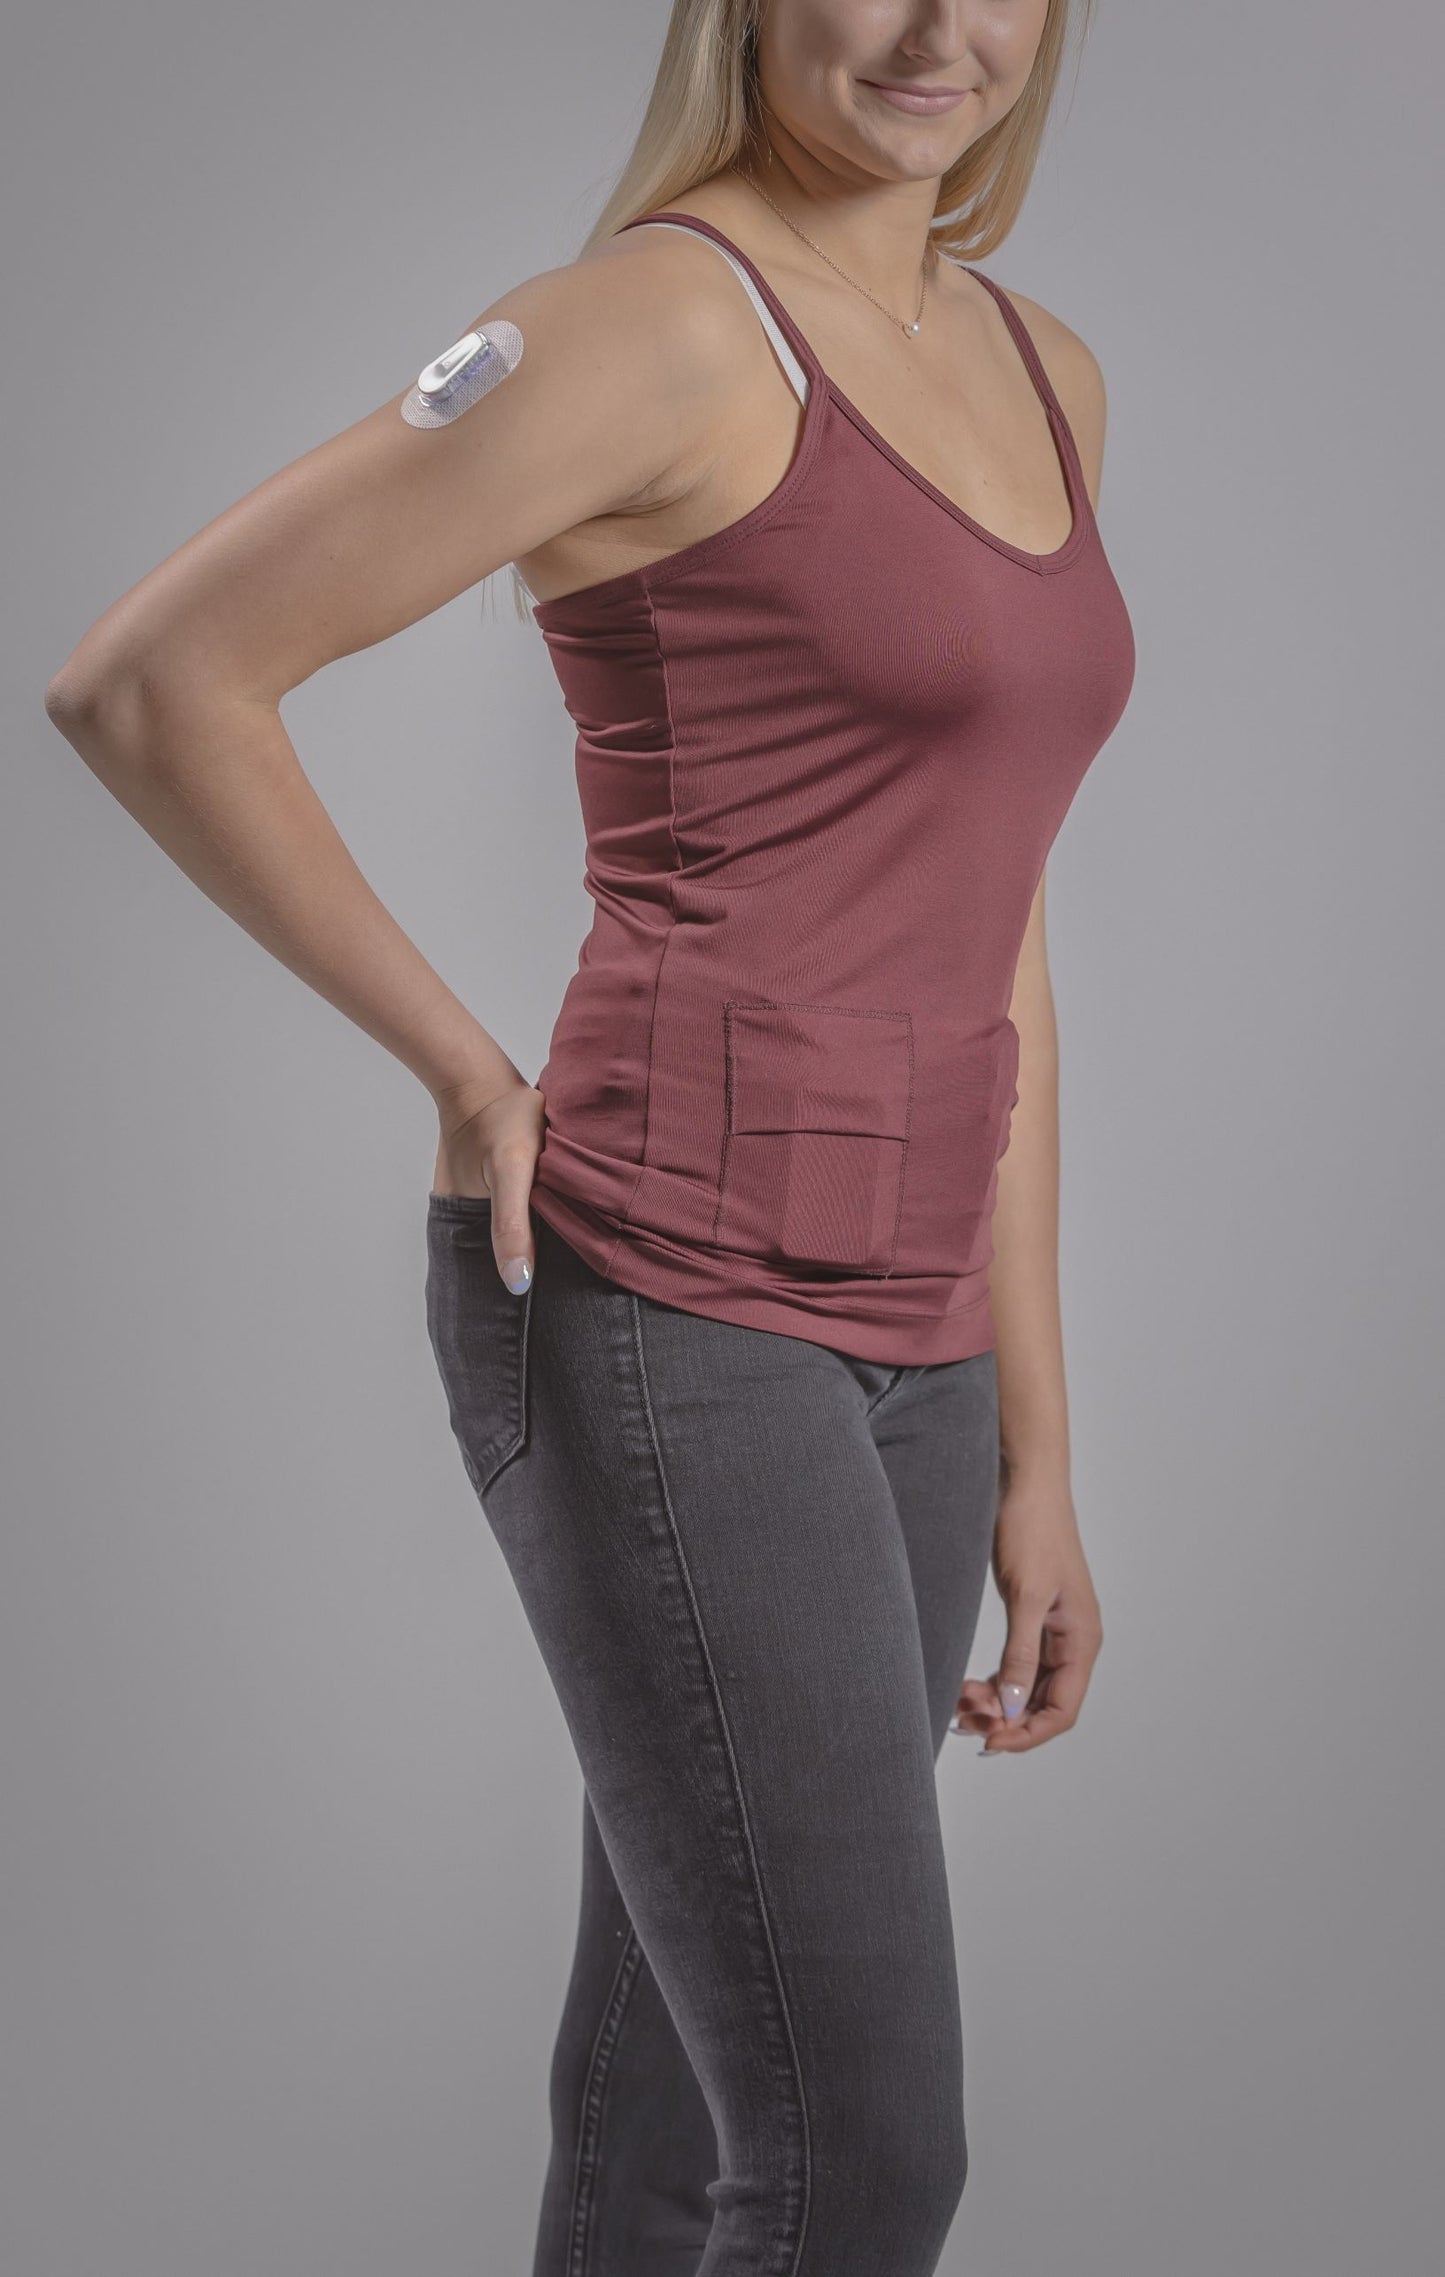 Women's Activewear Cami Tank with Insulin pump and Cell Phone Pockets